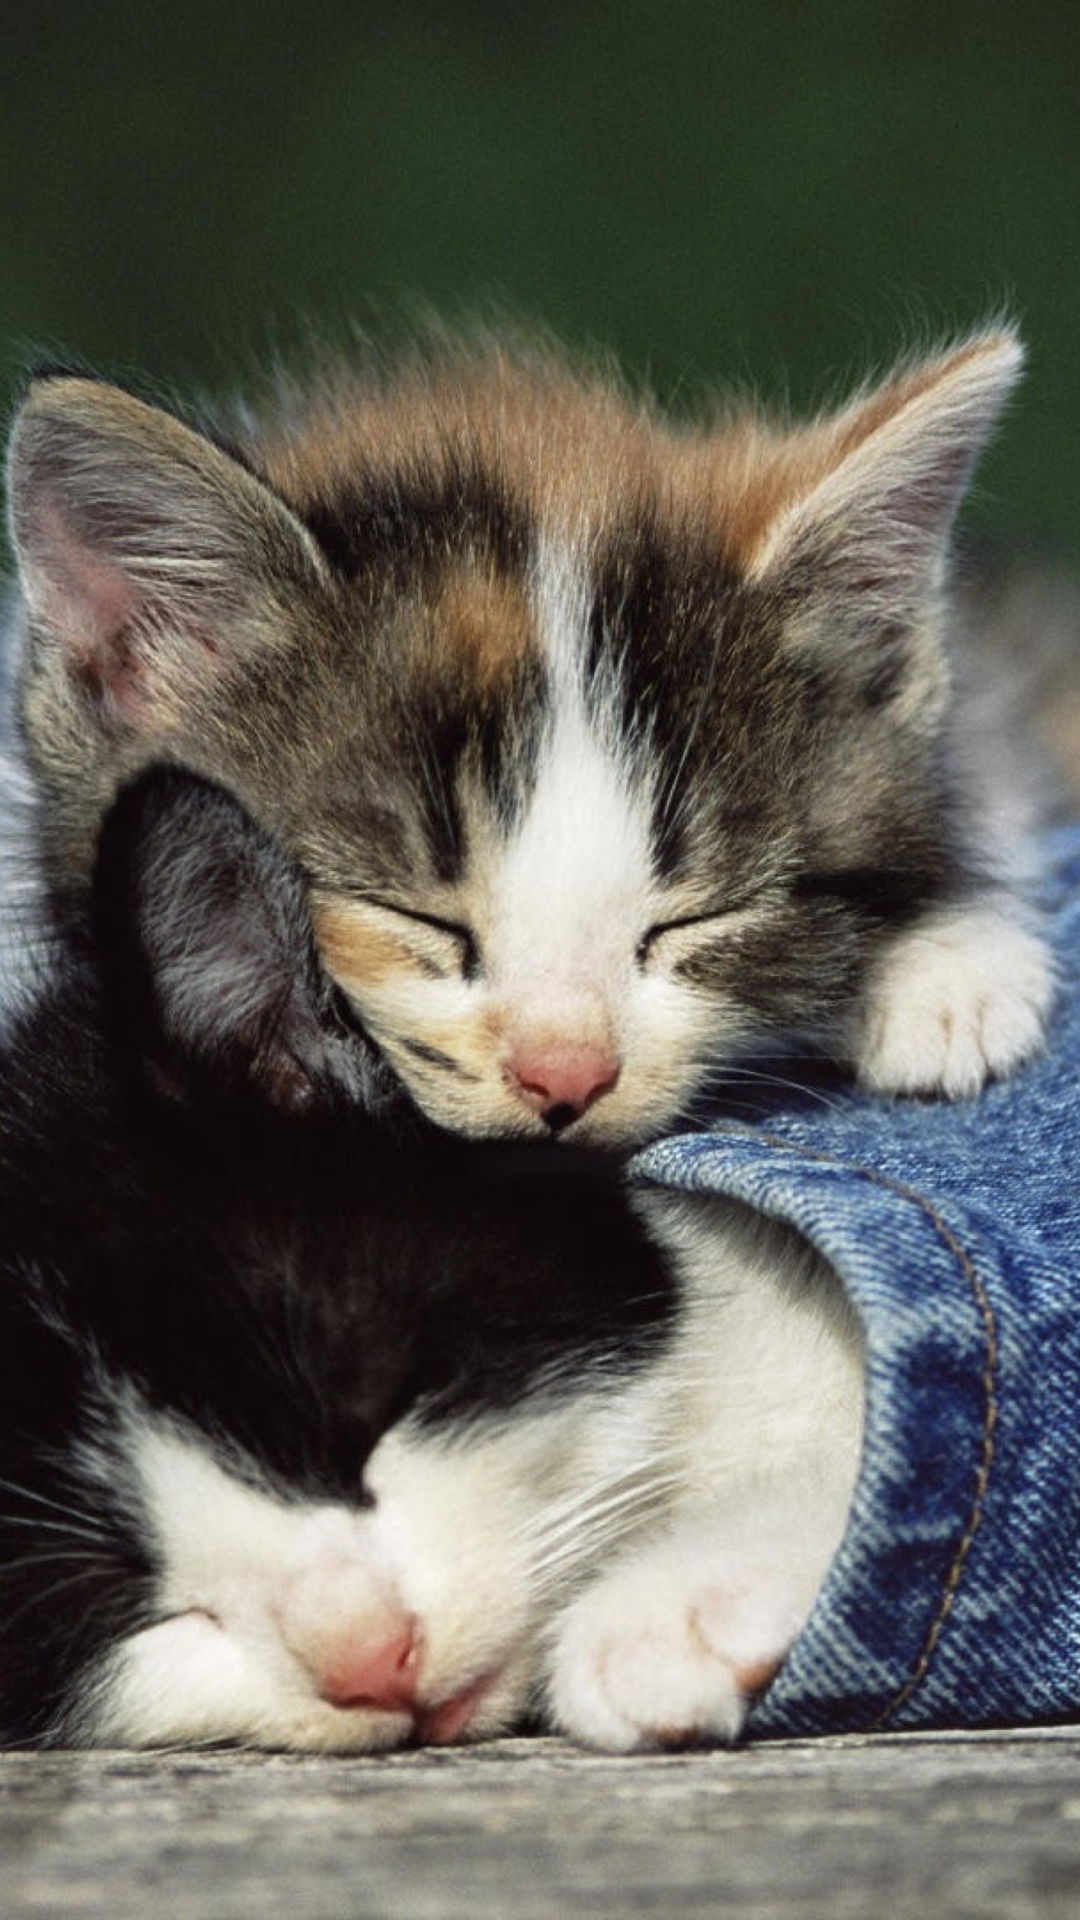 Cute Cats And Jeans screenshot #1 1080x1920